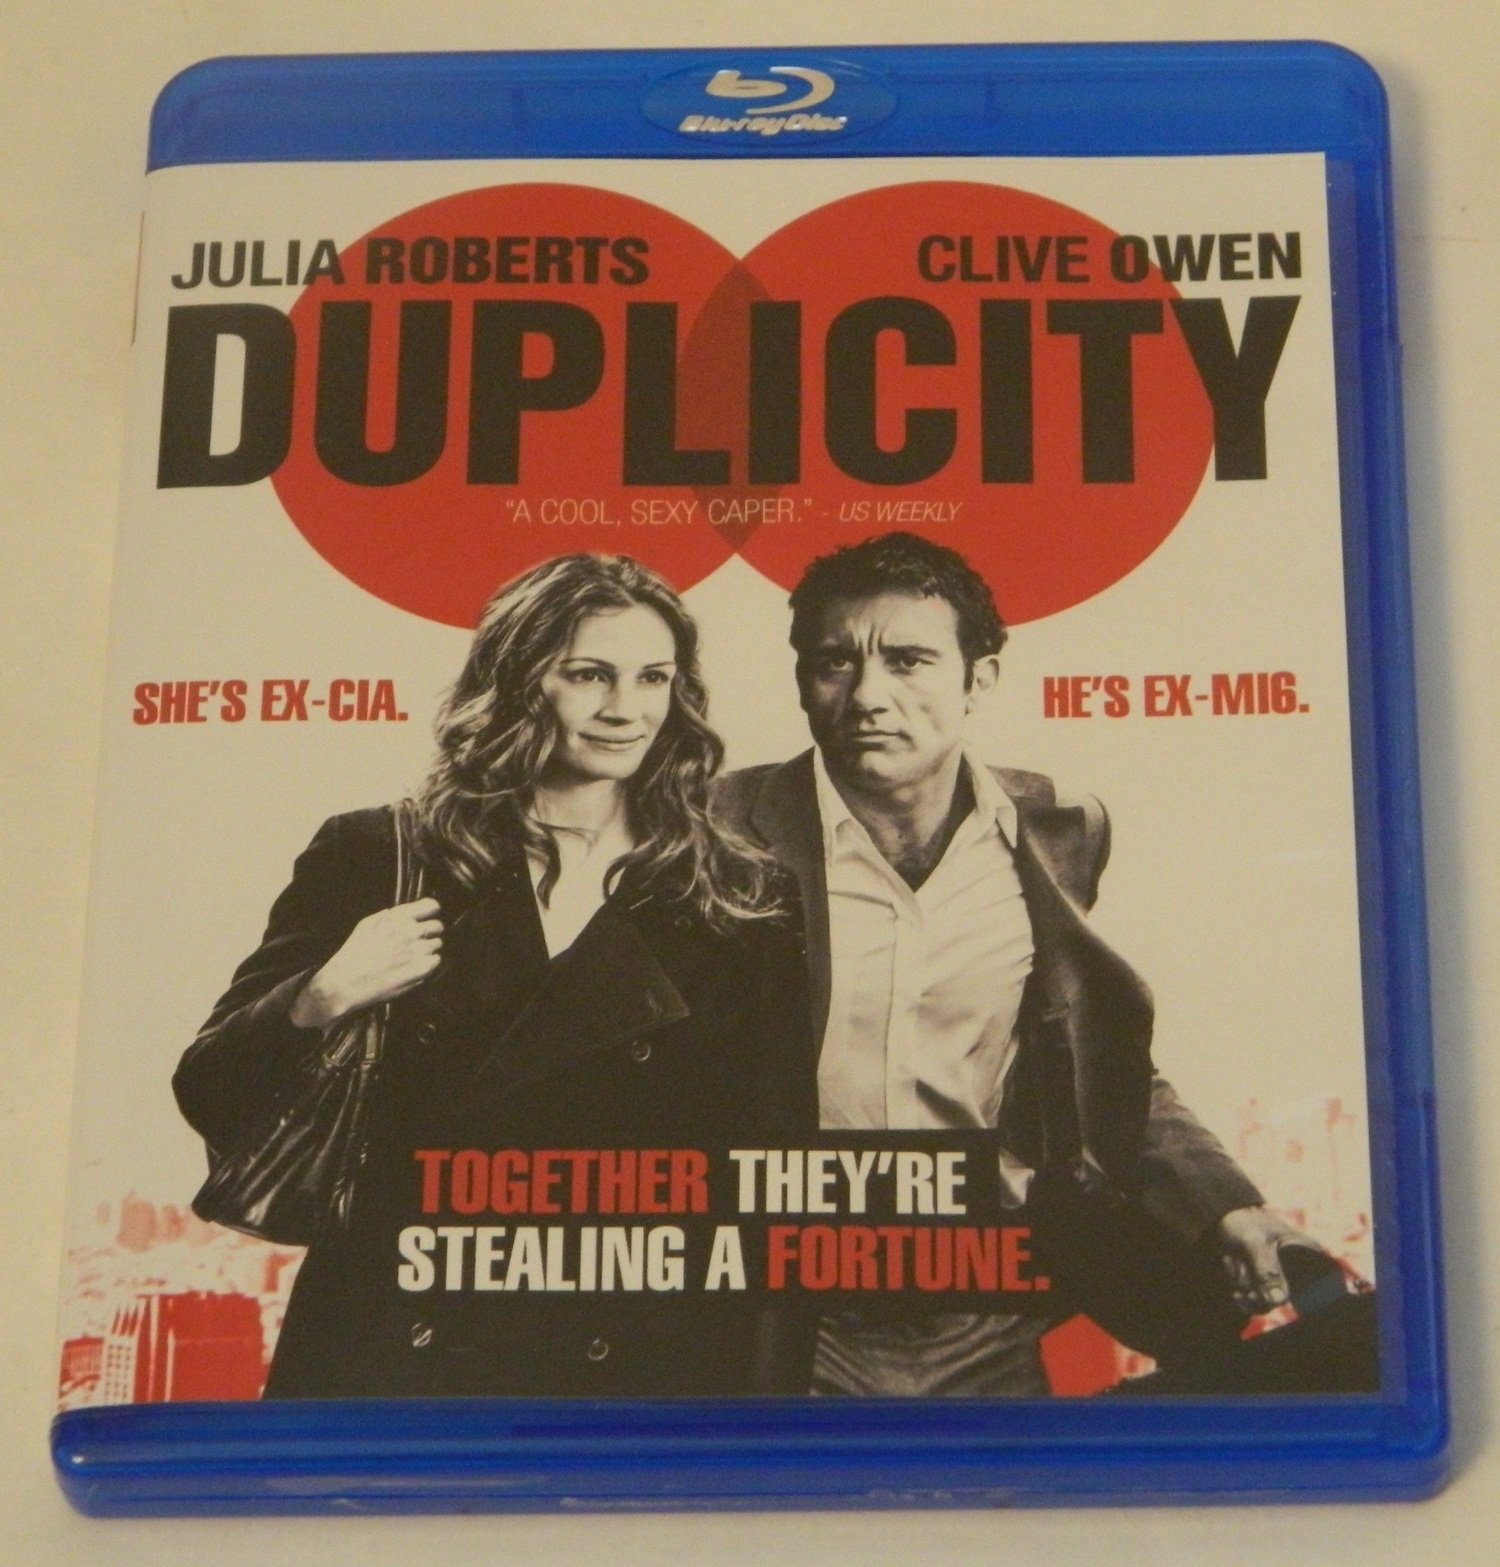 Duplicity Blu-Ray Review